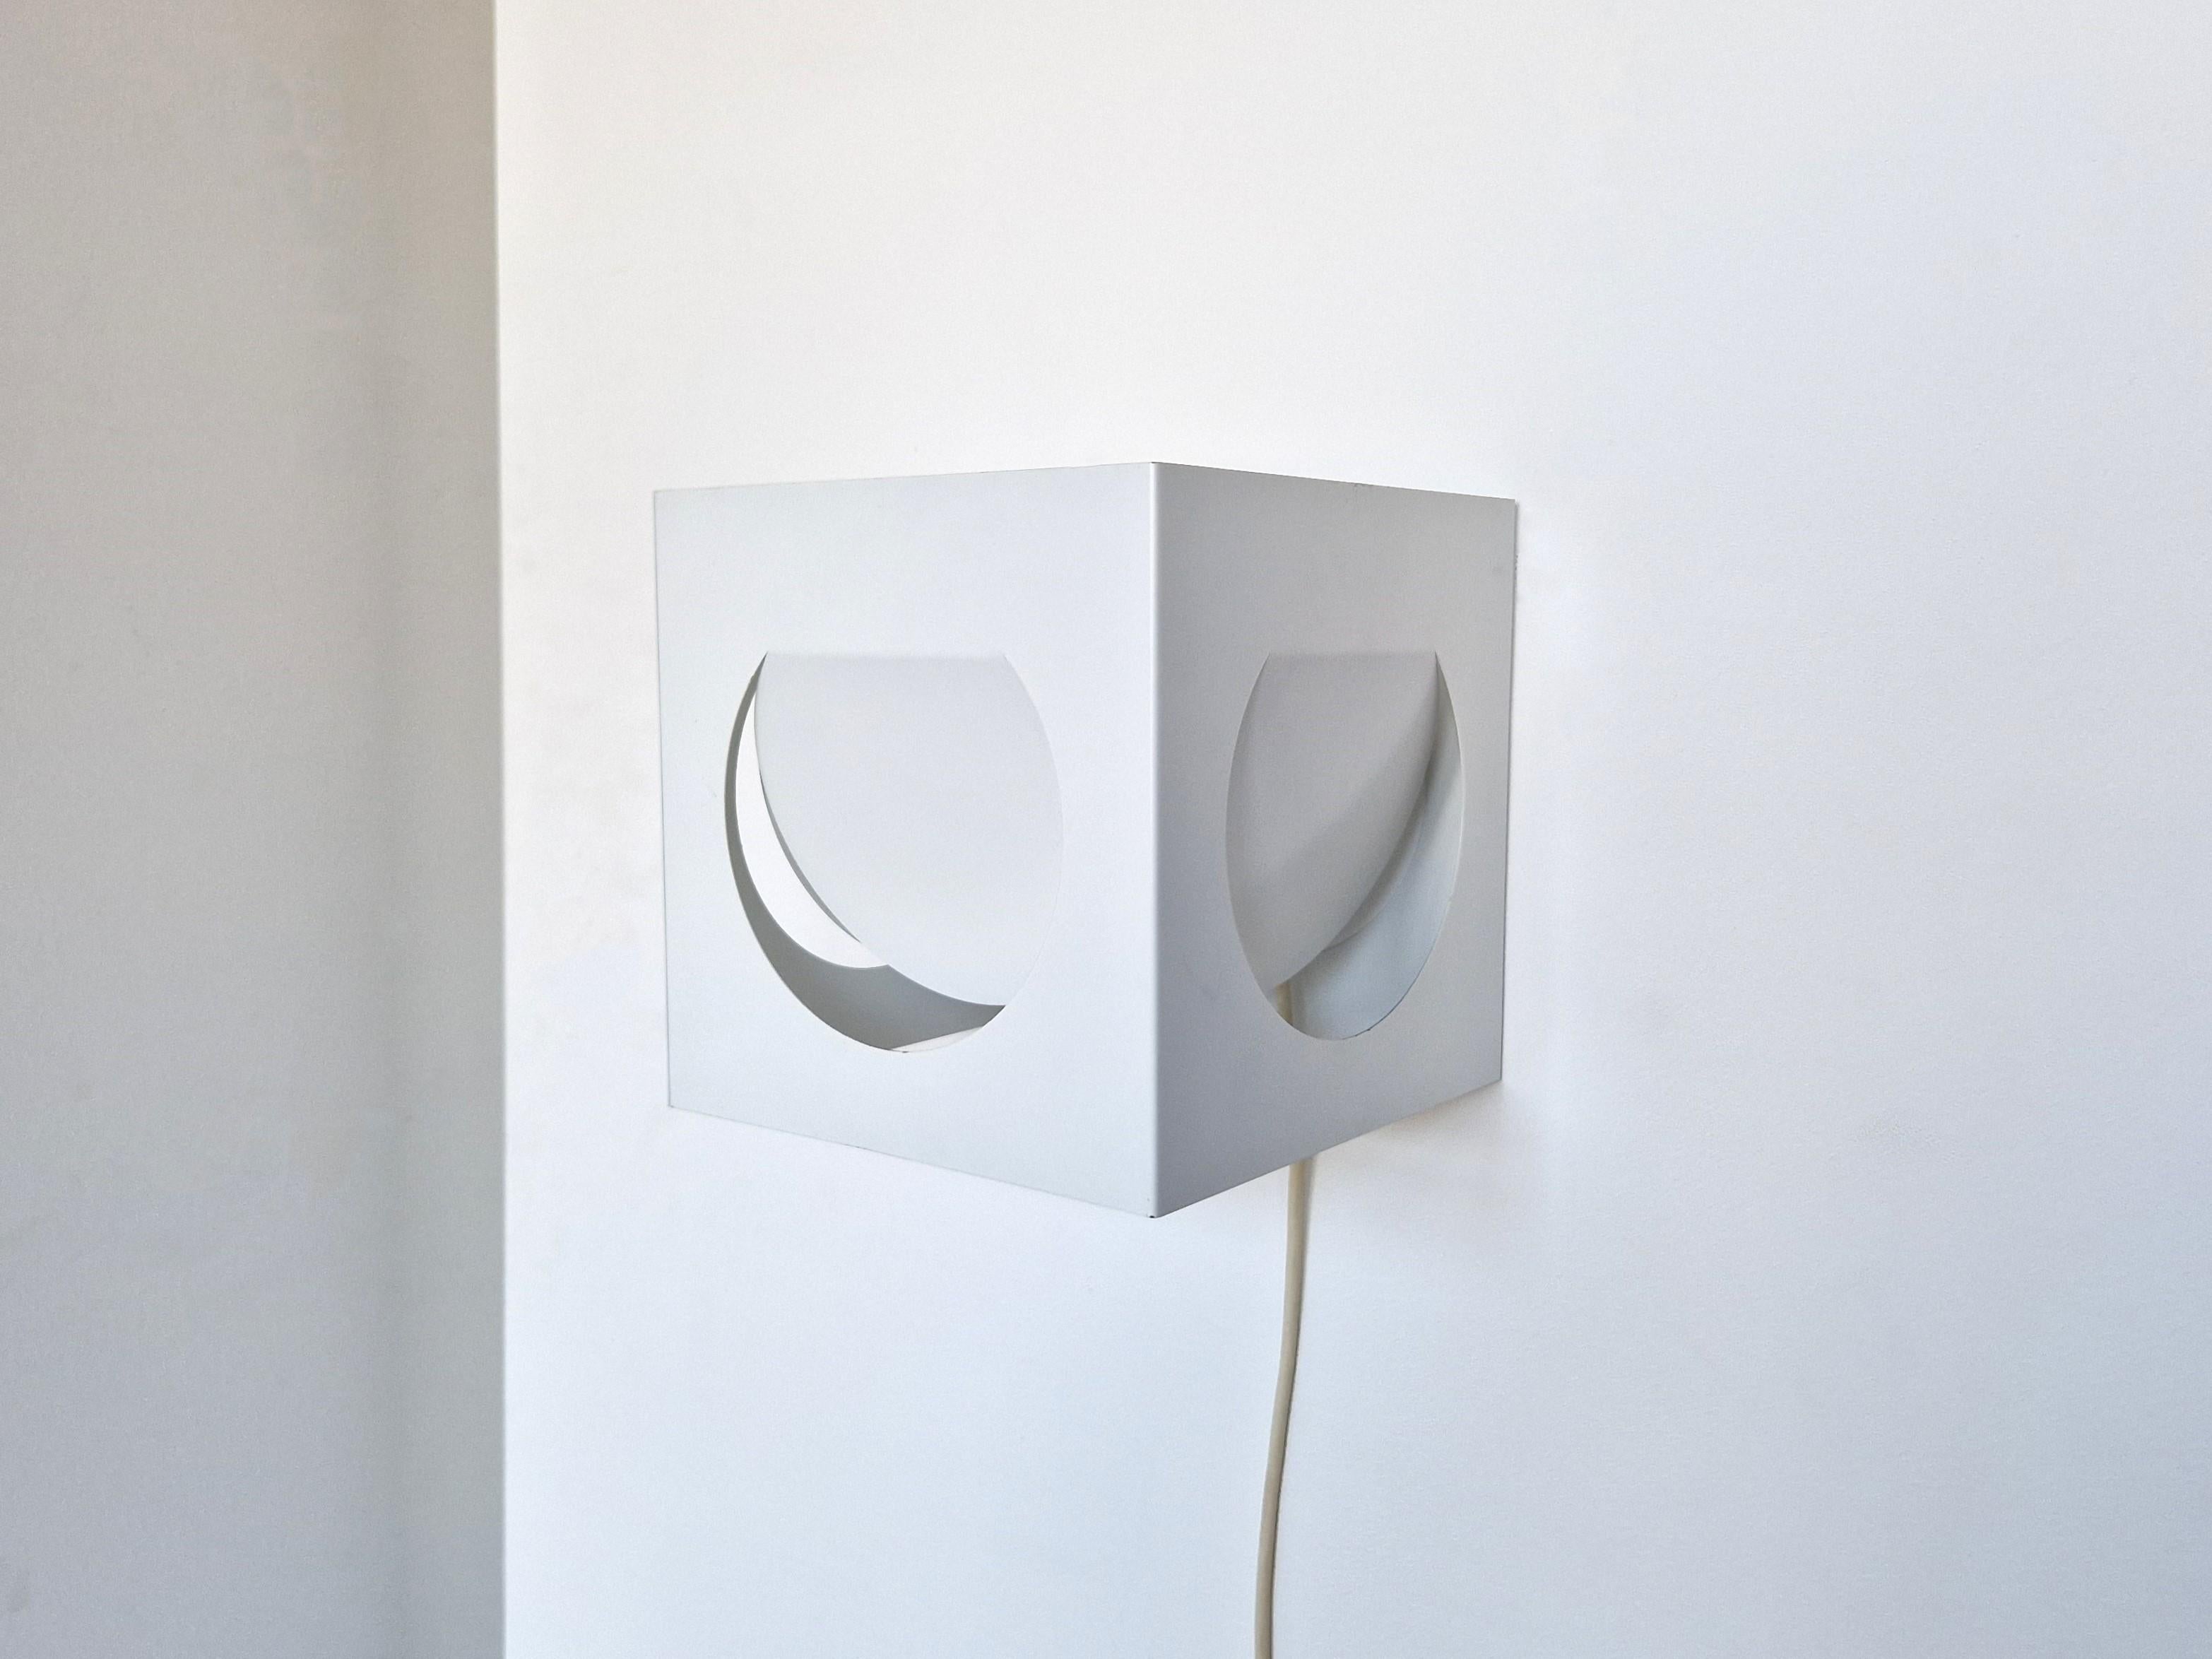 This geometric shaped wall sconce was designed by Shogo Suzuki for Orno in the early 1960's. It was designed after an exchange project beween Finnish and Japanese designers. Shogo Suzuki came to work with Lisa Johansson Pape at Orno. The lamp has